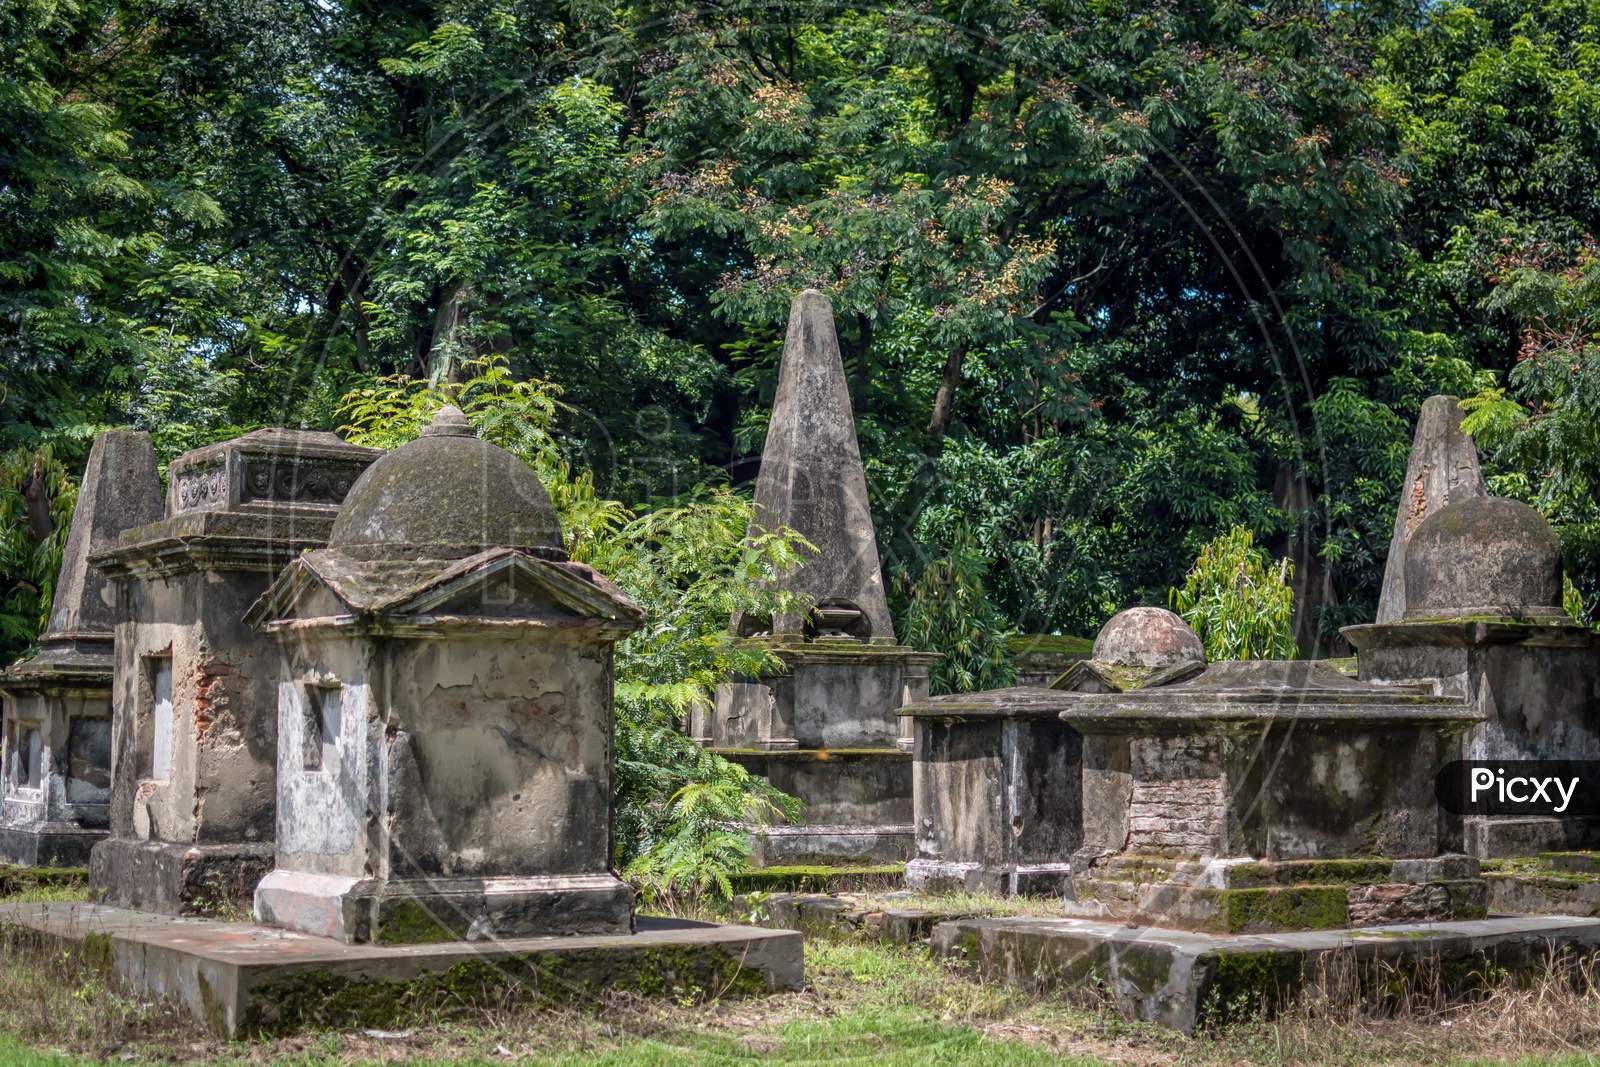 Old Trees And Ancient Gravestones Tombs Of South Park Street Cemetery In Kolkata, India. The Largest Christian Cemetery In Asia